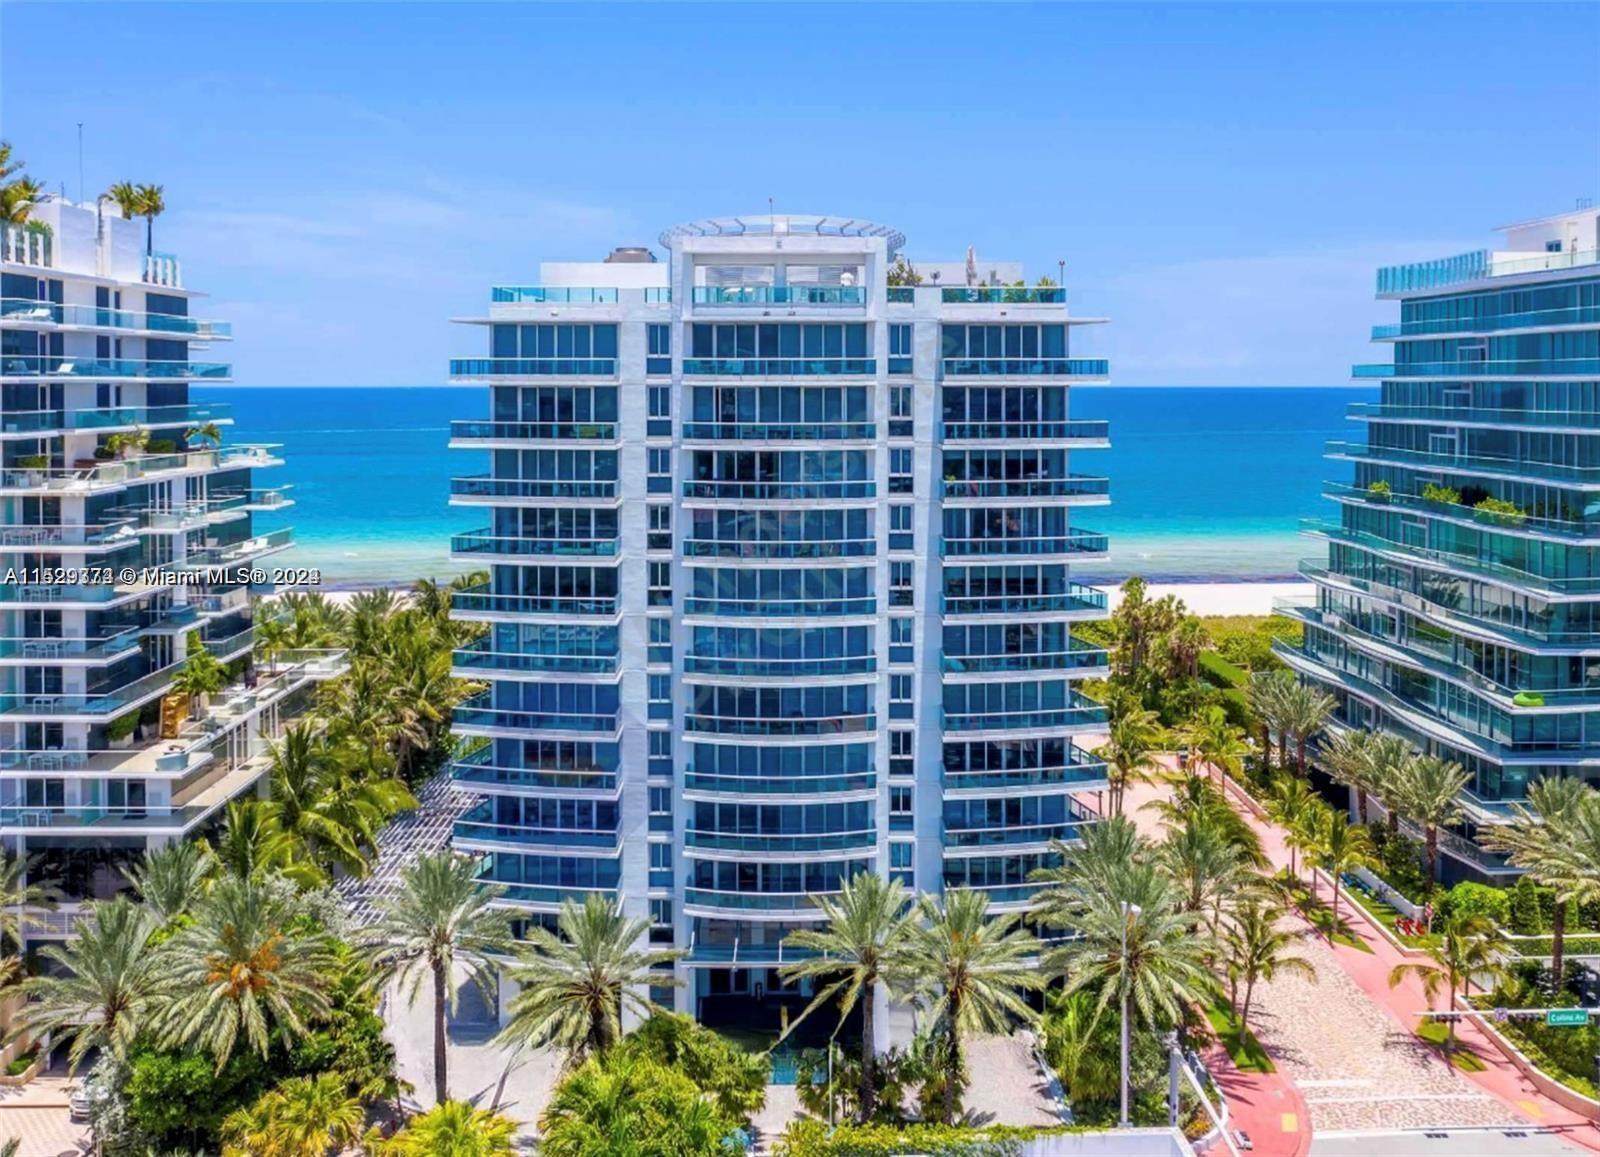 Photo of 9401 Collins Ave #603 in Surfside, FL